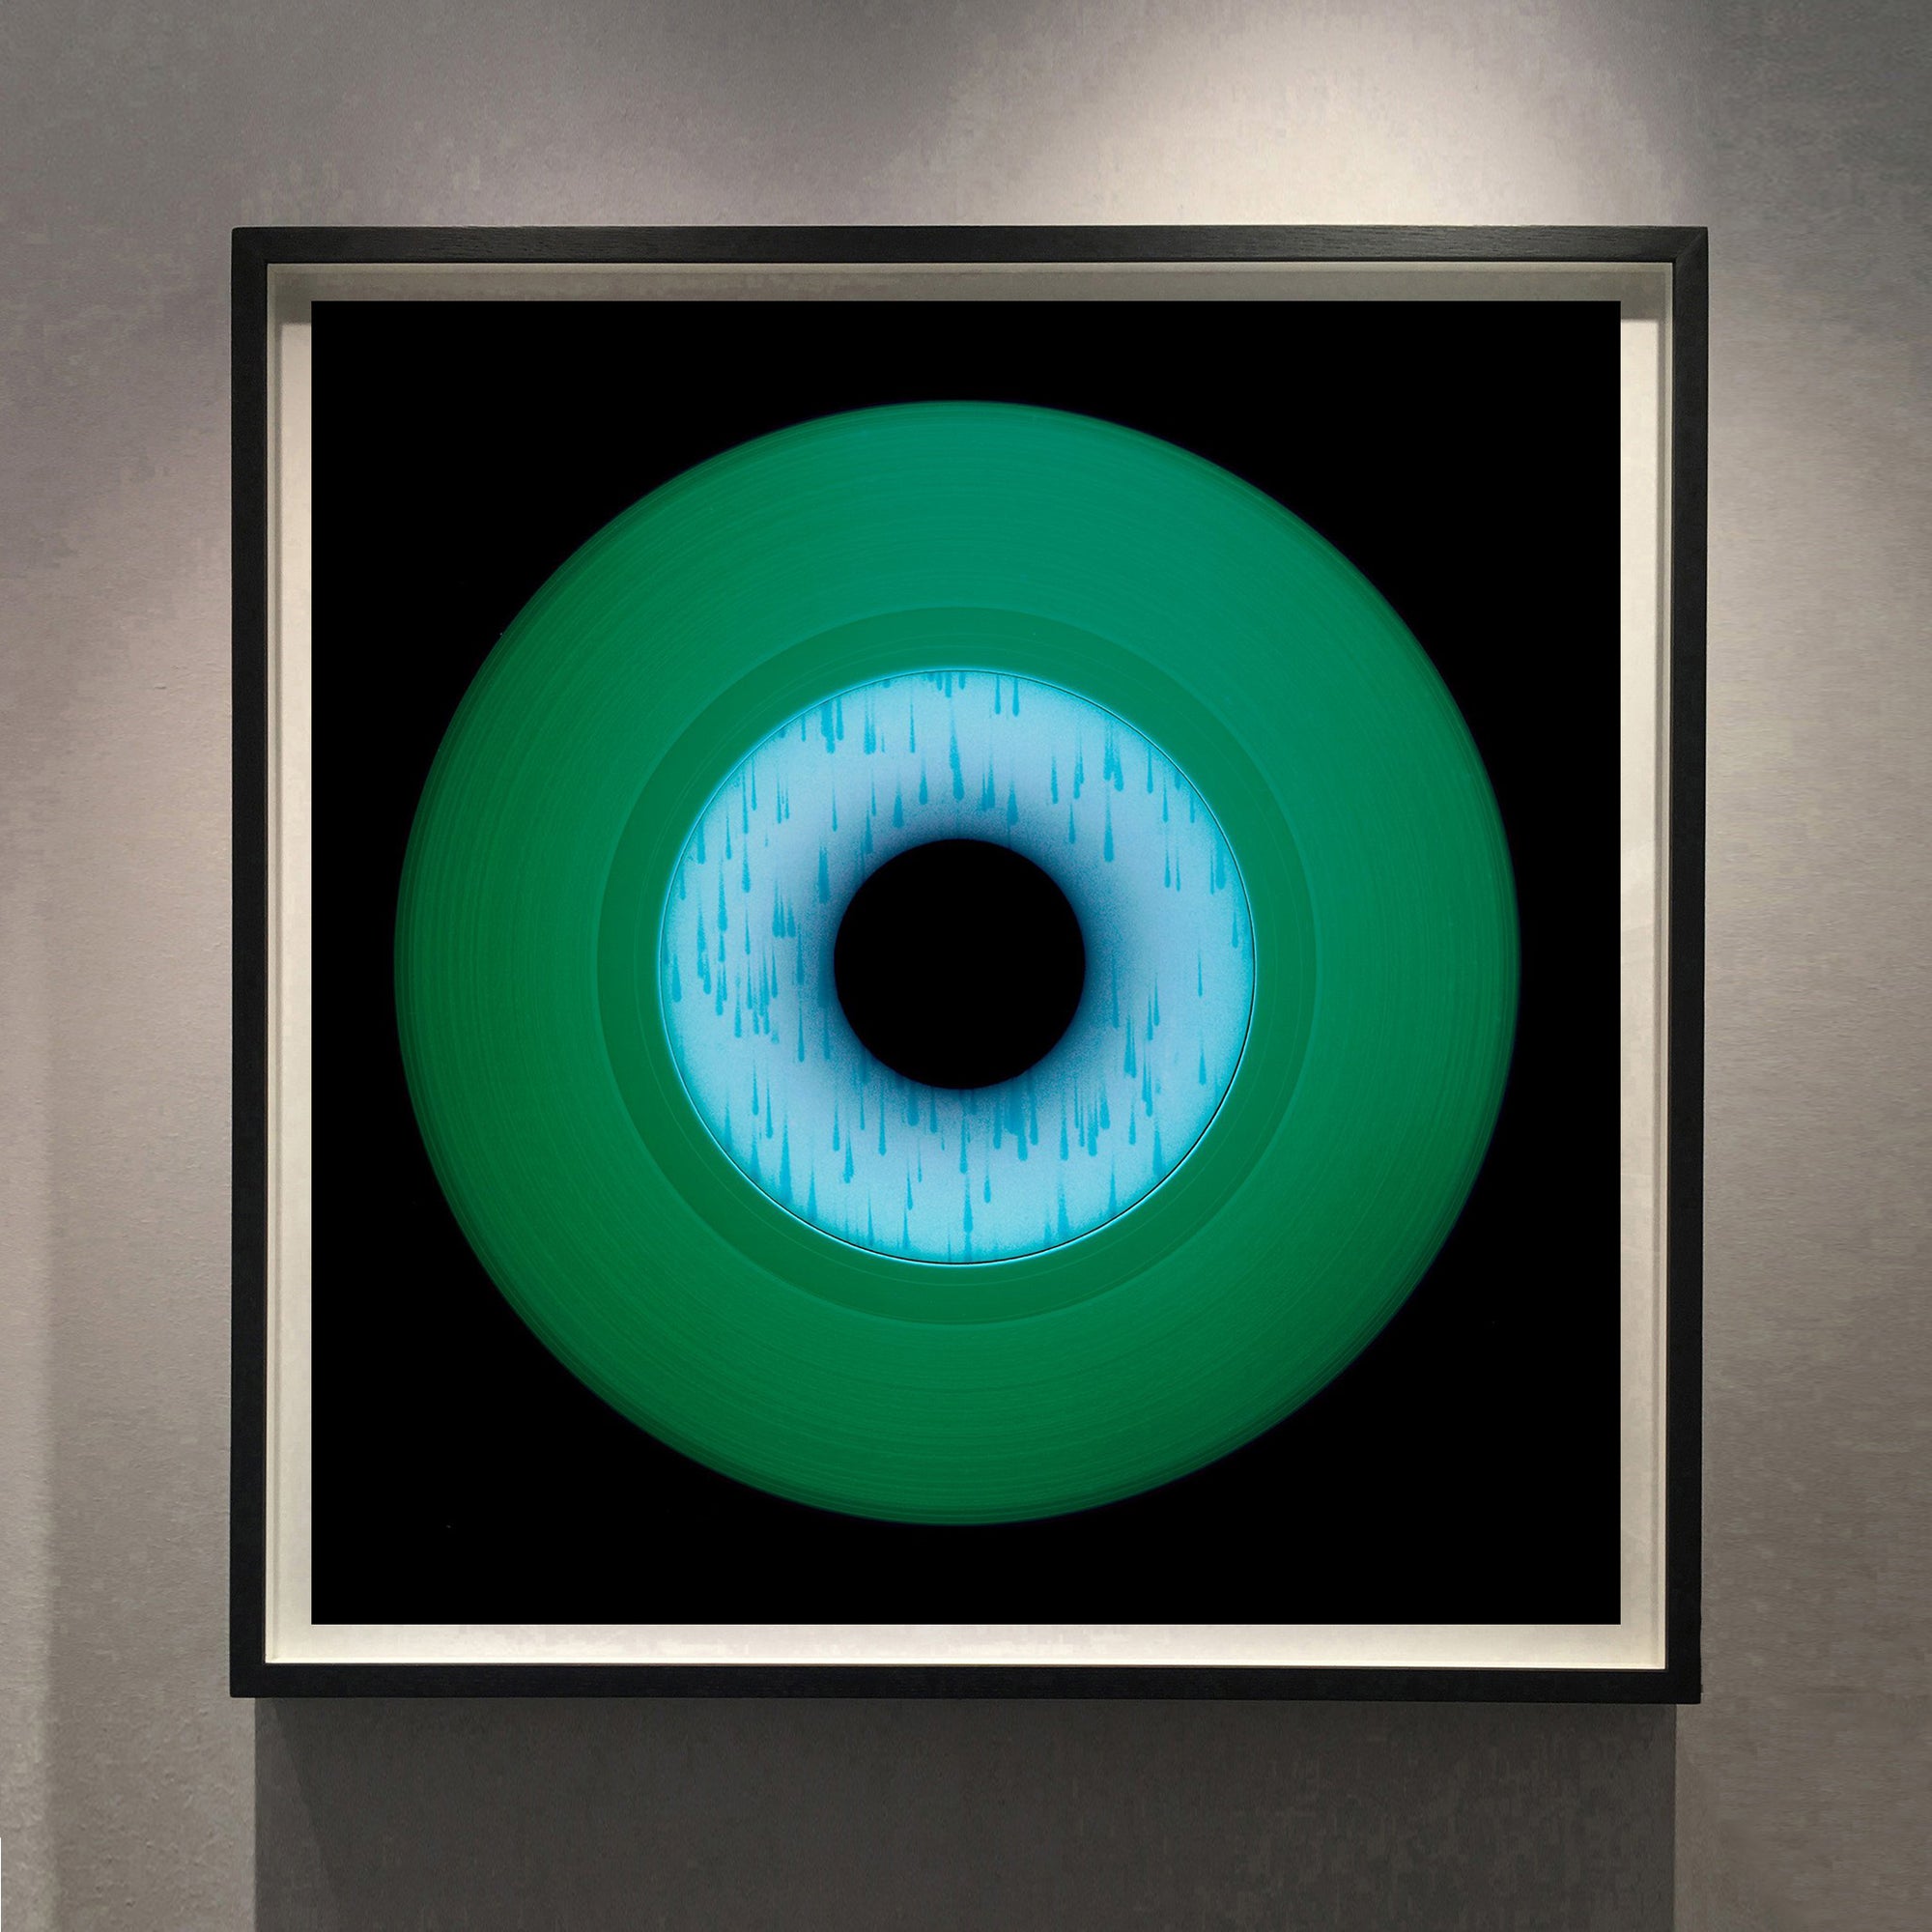 Vinyl Collection 'Other Side' (Green), 2020. Acclaimed contemporary photographers, Richard Heeps and Natasha Heidler have collaborated to make this beautifully mesmerising collection. A celebration of the vinyl record and analogue technology, which reflects the artists practice within photography. 